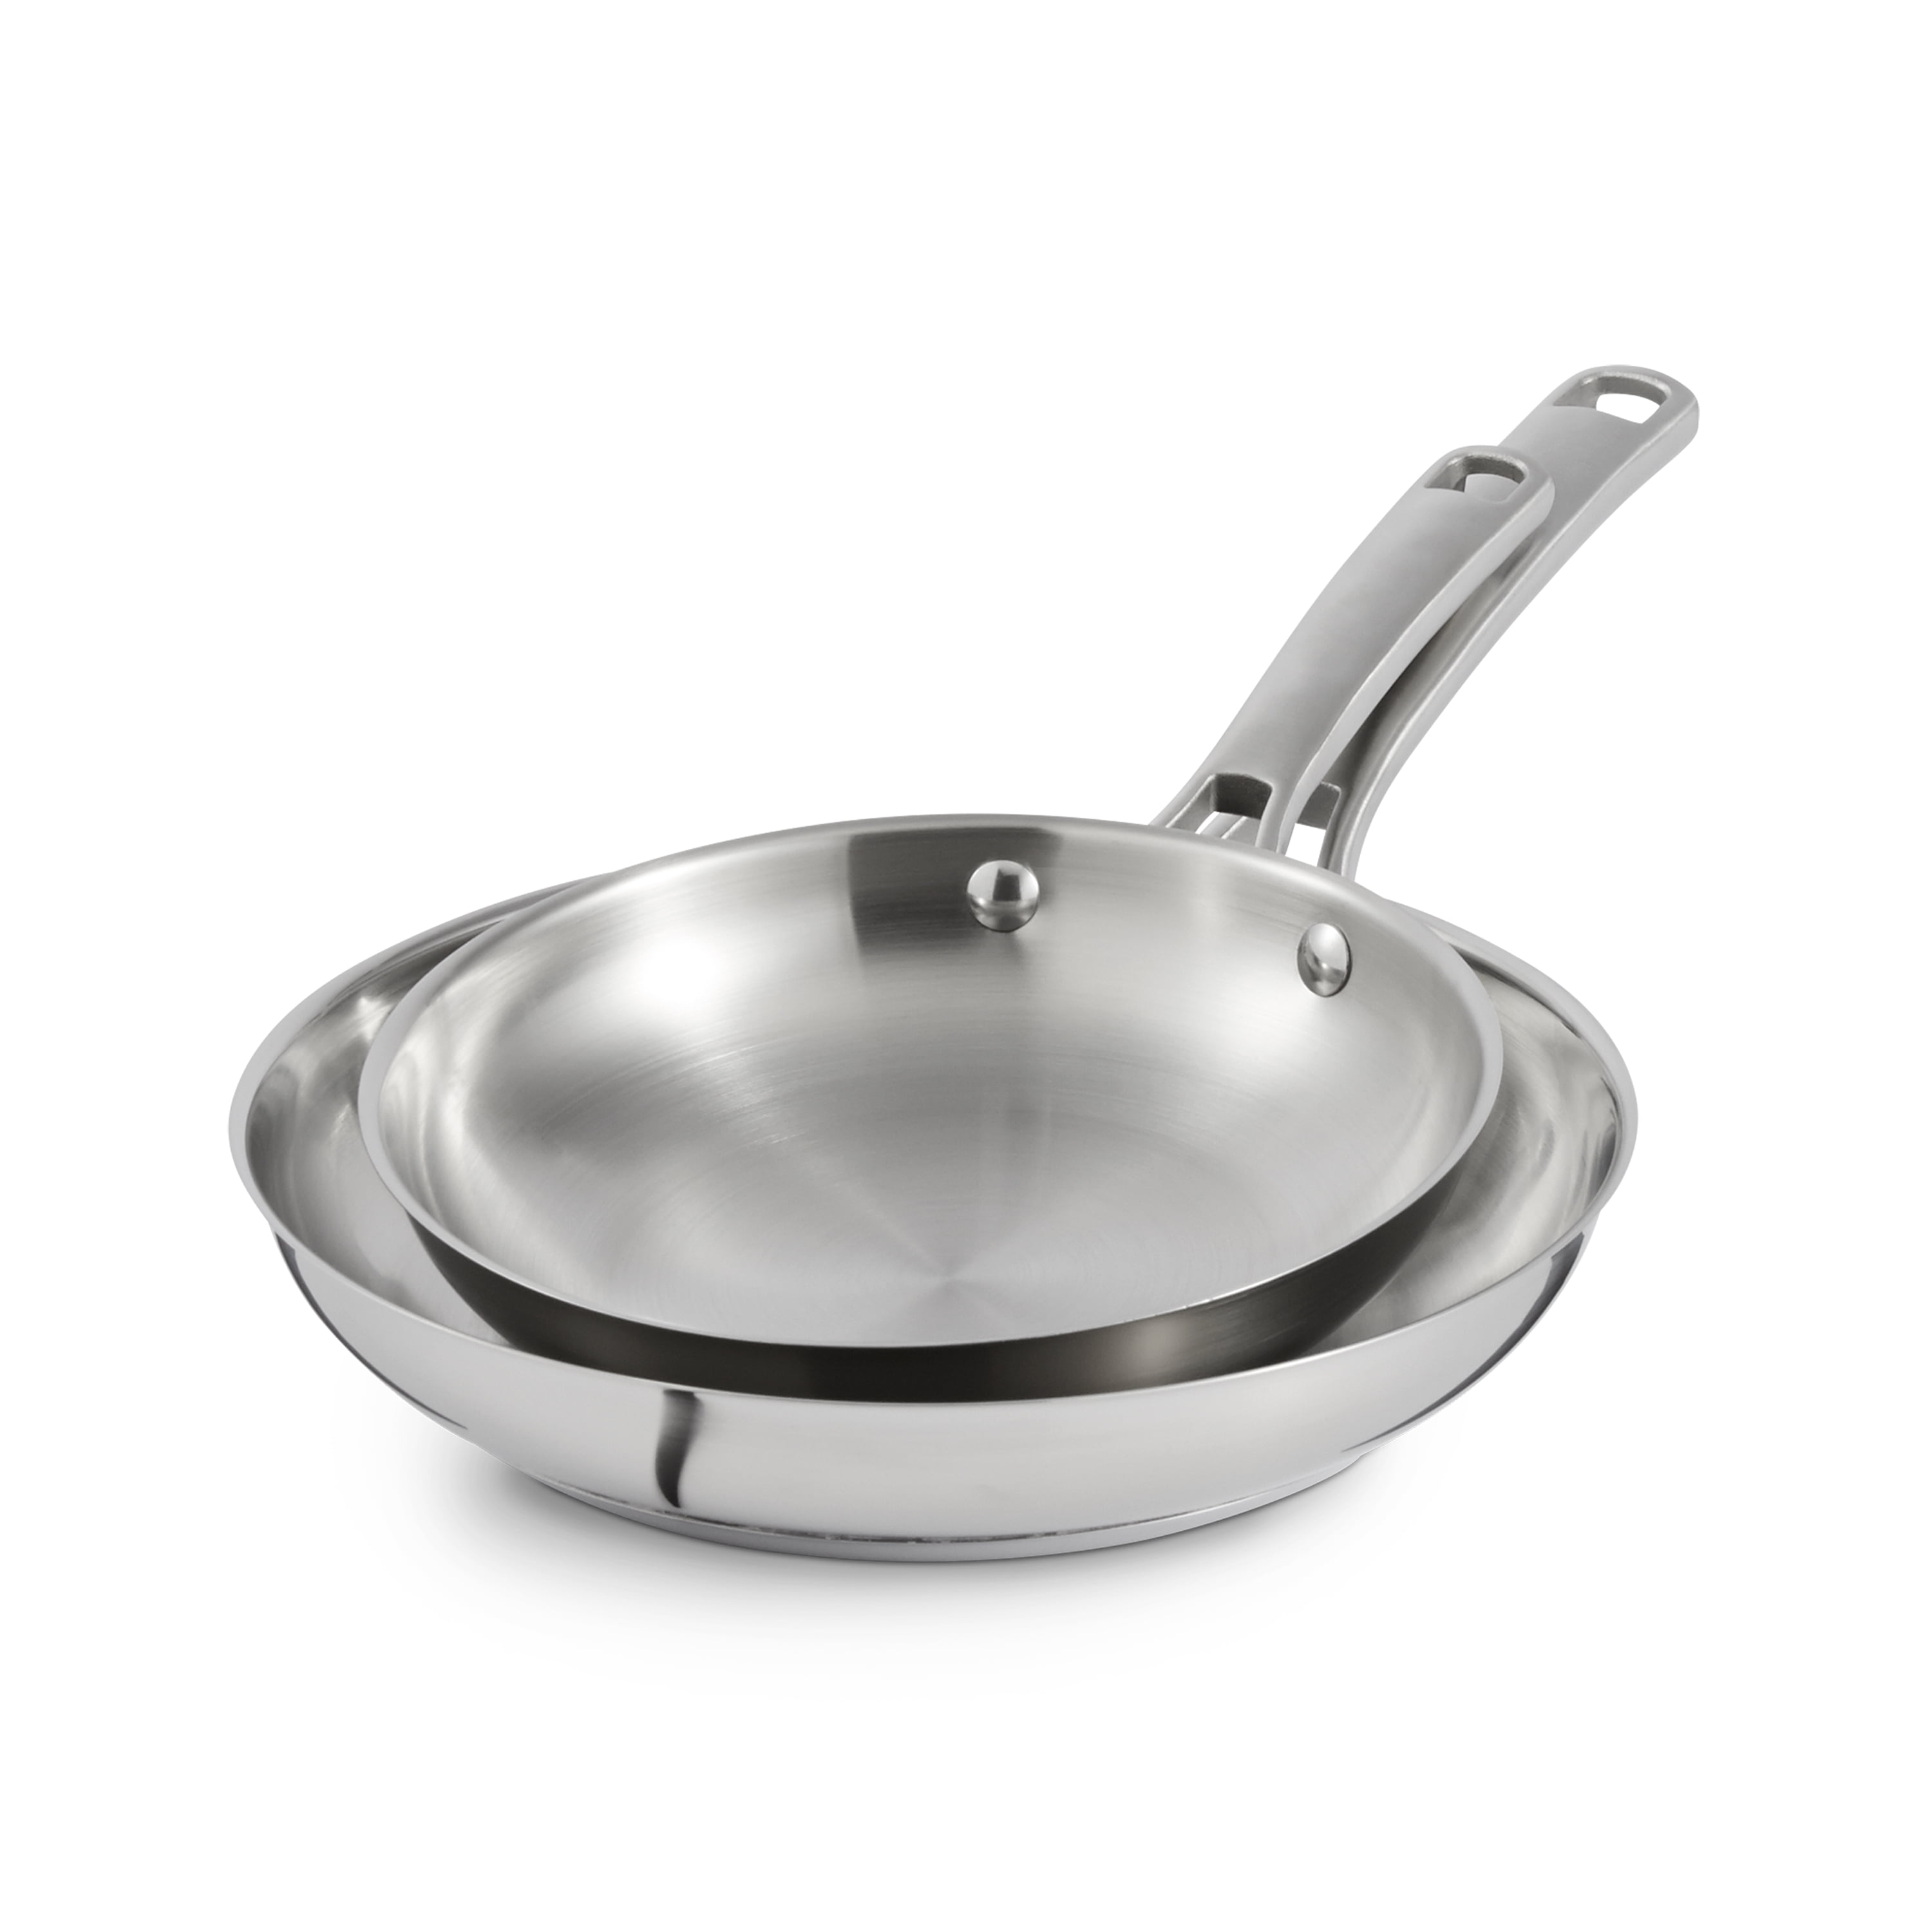 Calphalon Classic Stainless Steel 8-Inch and 10-Inch Fry Pan Set, 1891278 